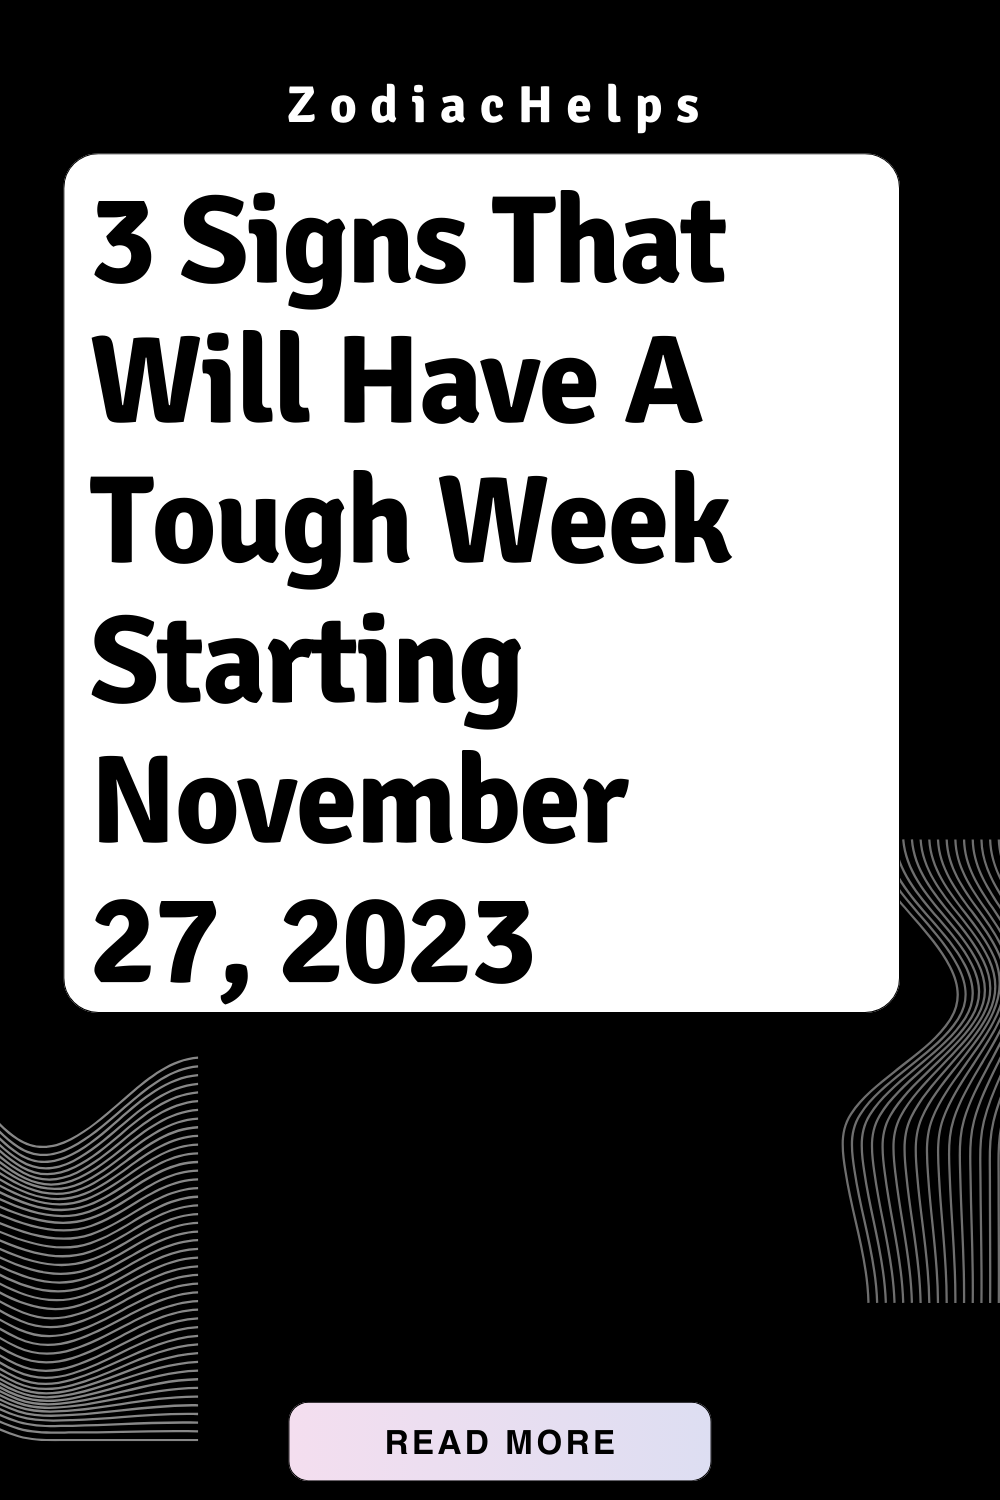 3 Signs That Will Have A Tough Week Starting November 27, 2023